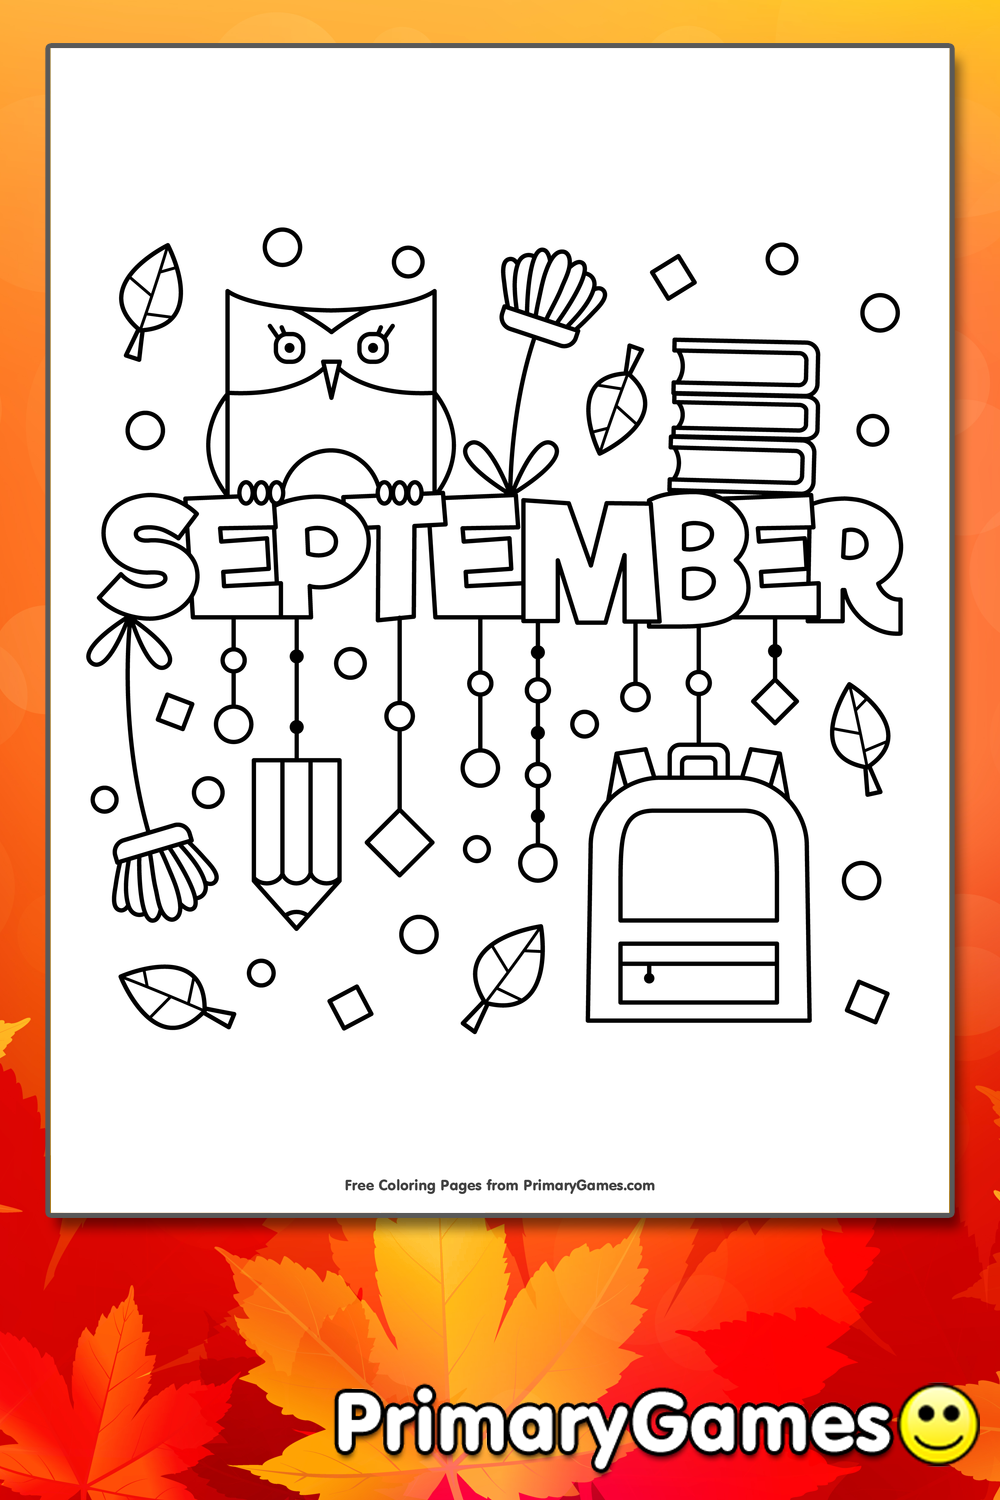 September coloring page â free printable pdf from